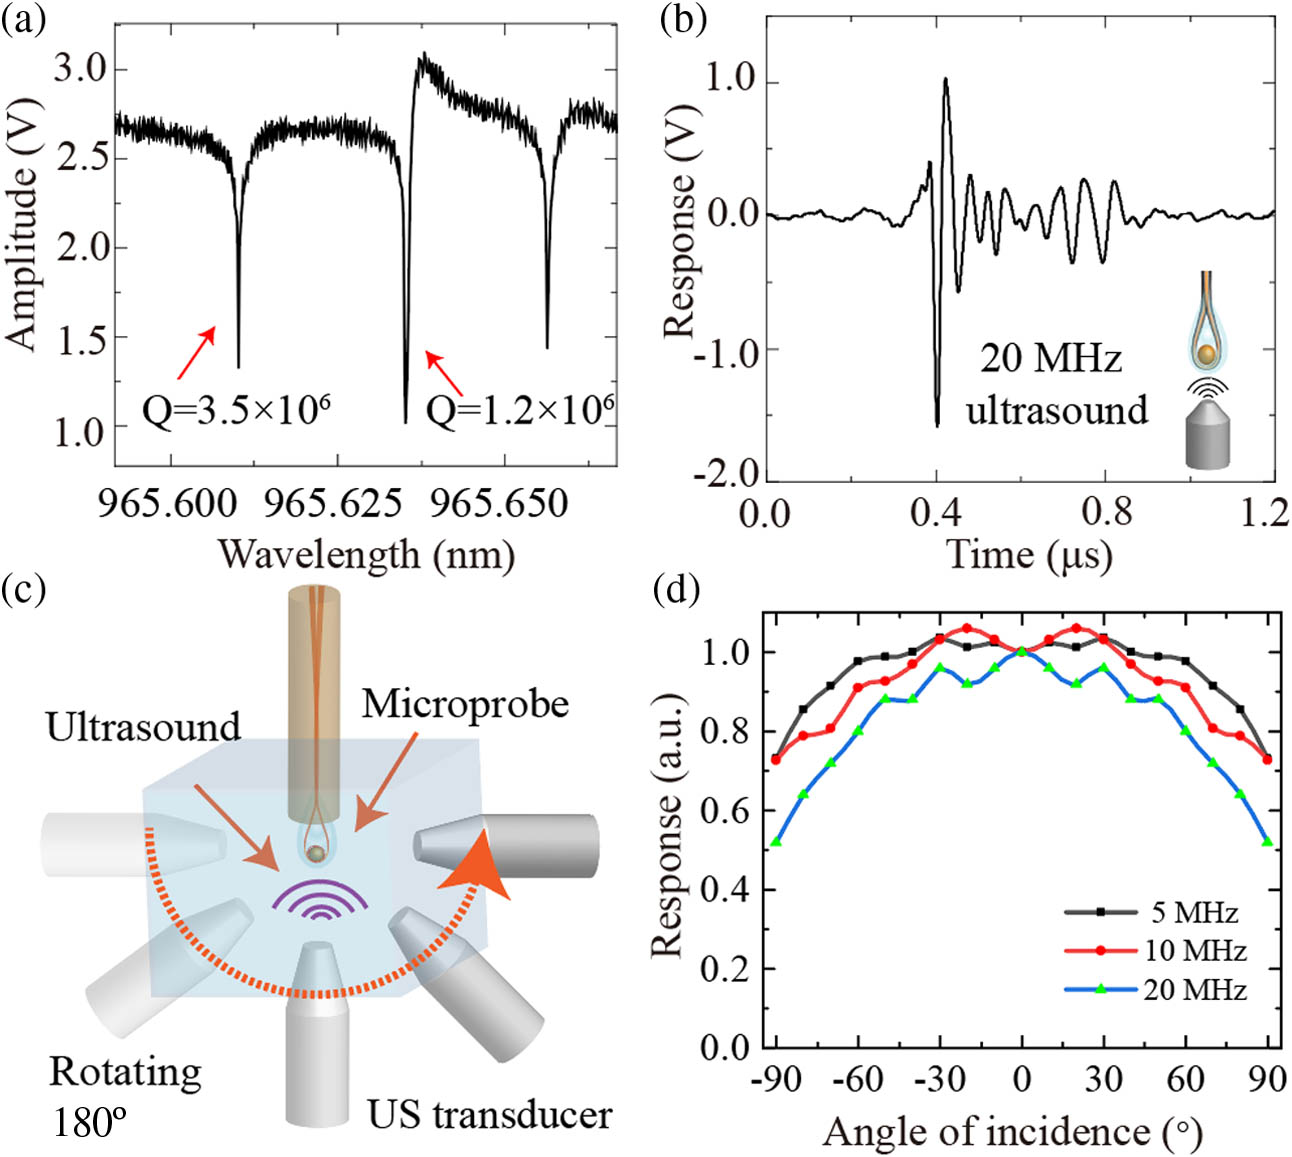 Performance characterization of the encapsulated microsphere microprobe. (a) The Q-factor characterization of the microcavity microprobe. (b) The response of microprobe sensor to the 20 MHz ultrasound. (c) The schematic representation of the angular response of the microprobe sensor. (d) The normalized curve of the angular response to different frequencies.